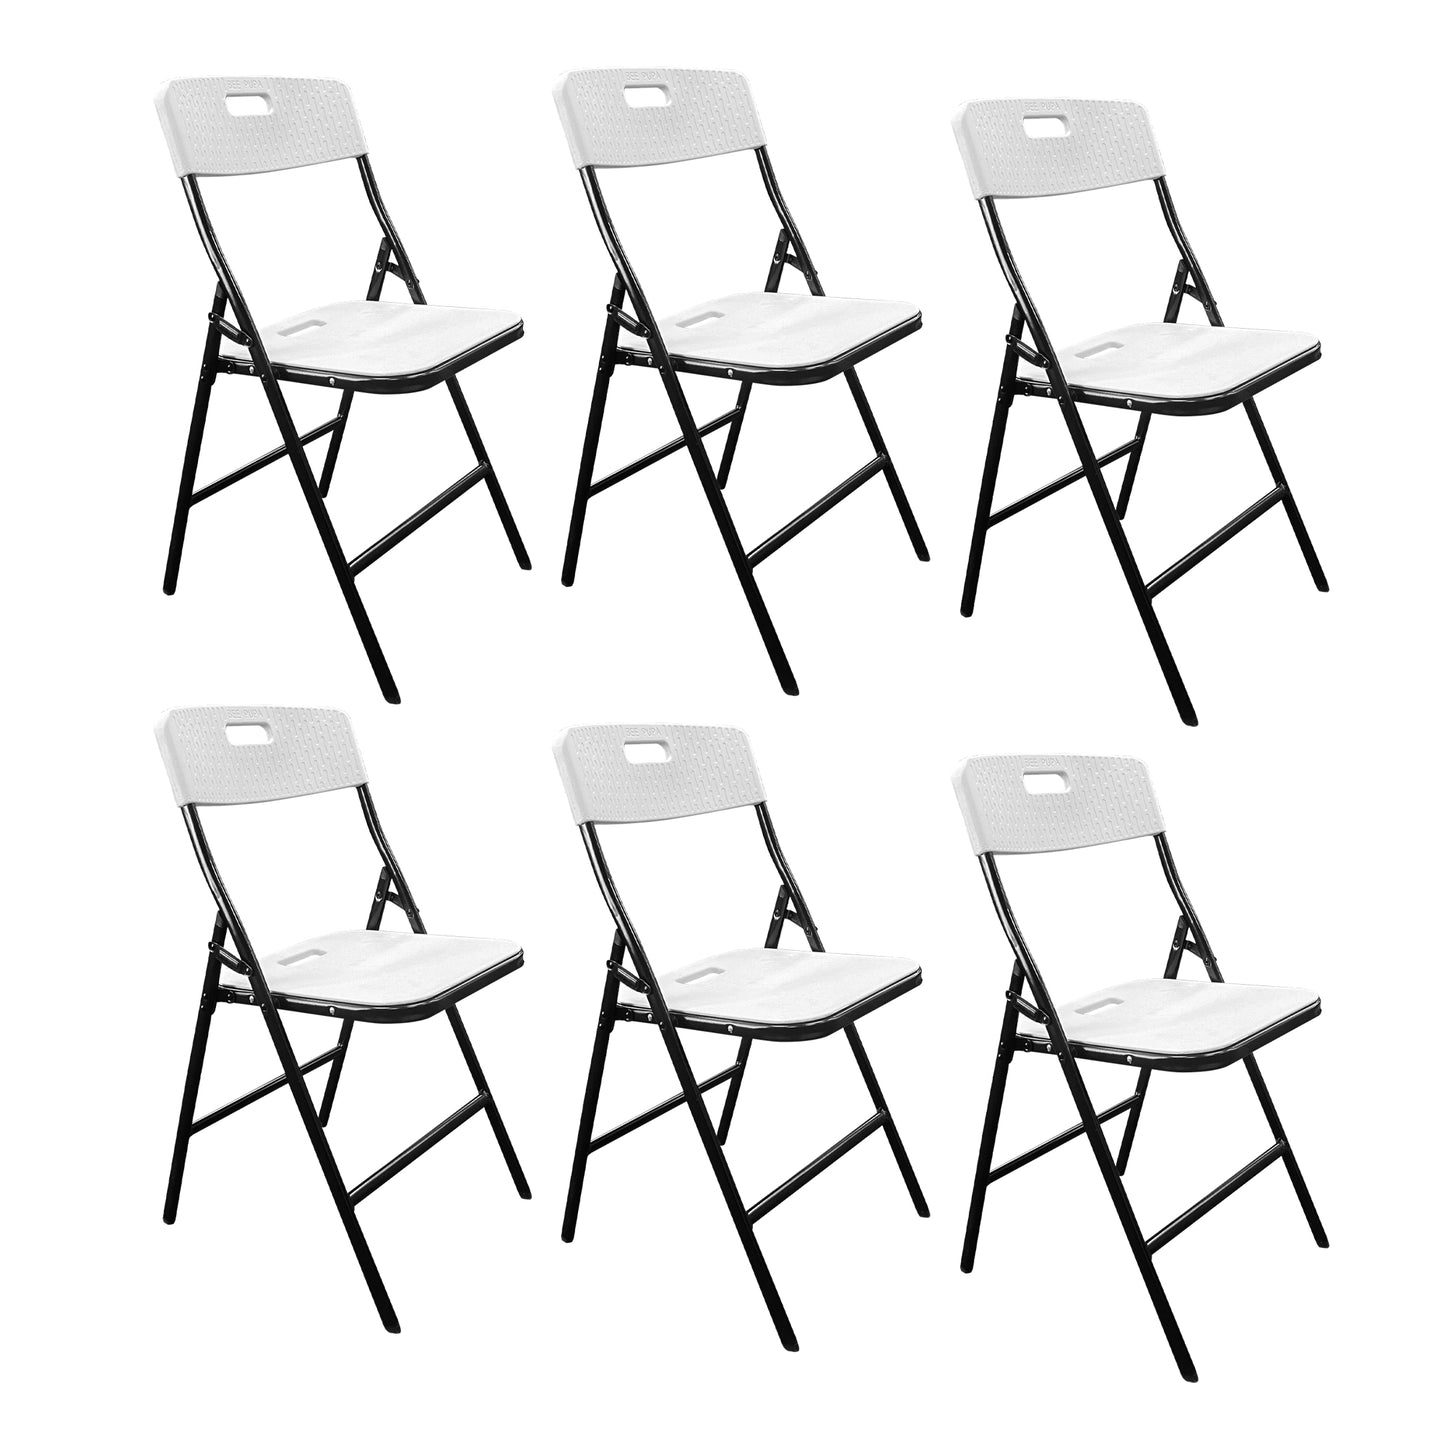 Textured Picnic Folding Chairs - 6 Pack - White - Creative Wagons